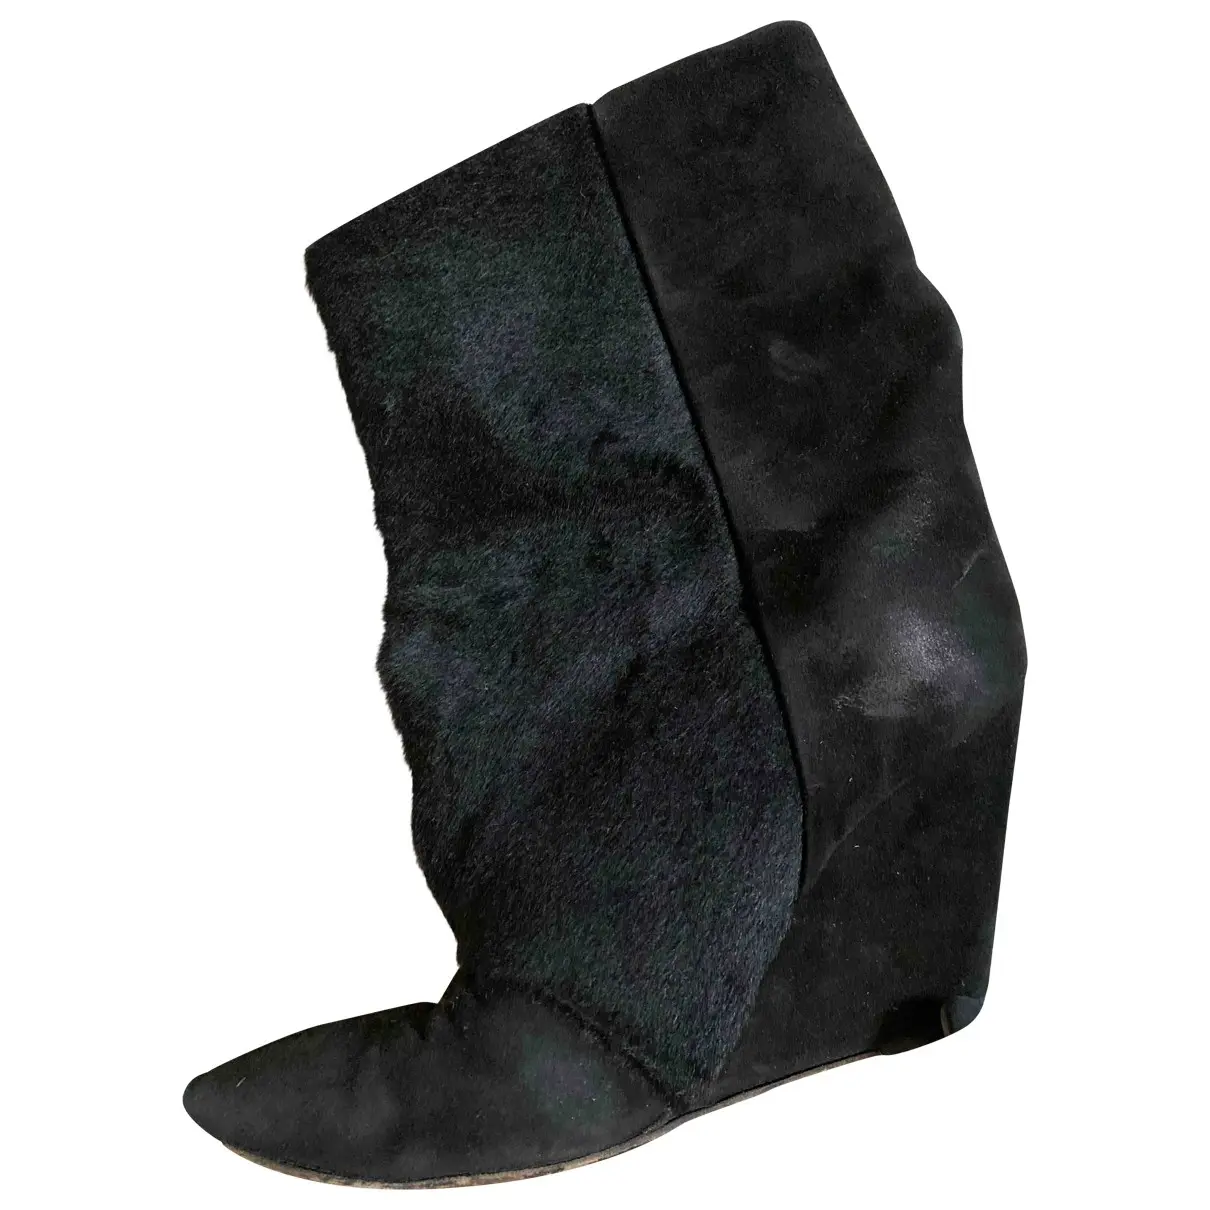 Purdey pony-style calfskin ankle boots Isabel Marant